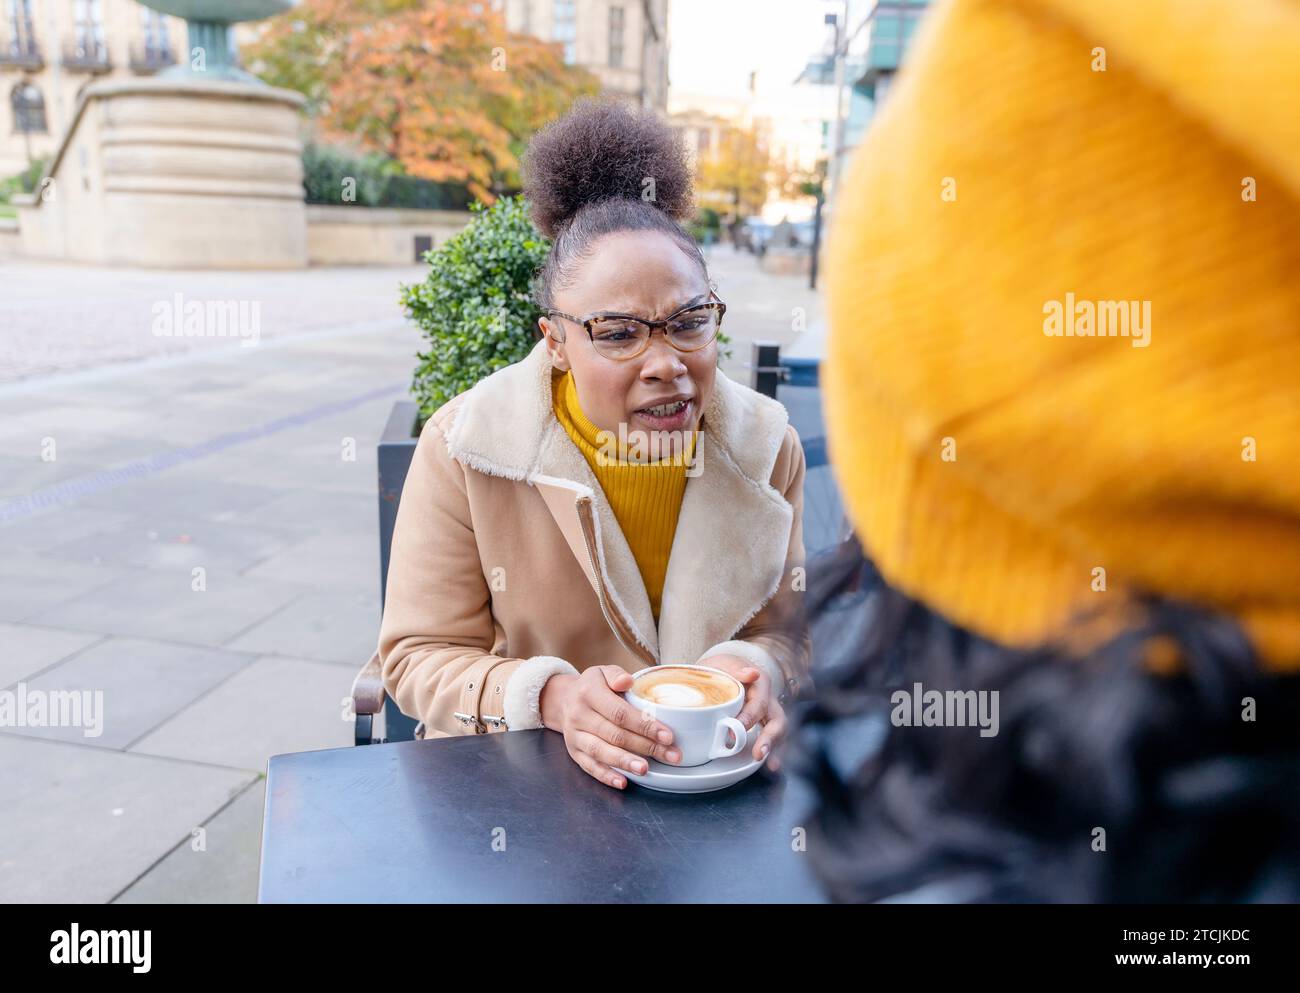 angry and unhappy woman in glasses  having an unpleasant conversation in a cafe Stock Photo